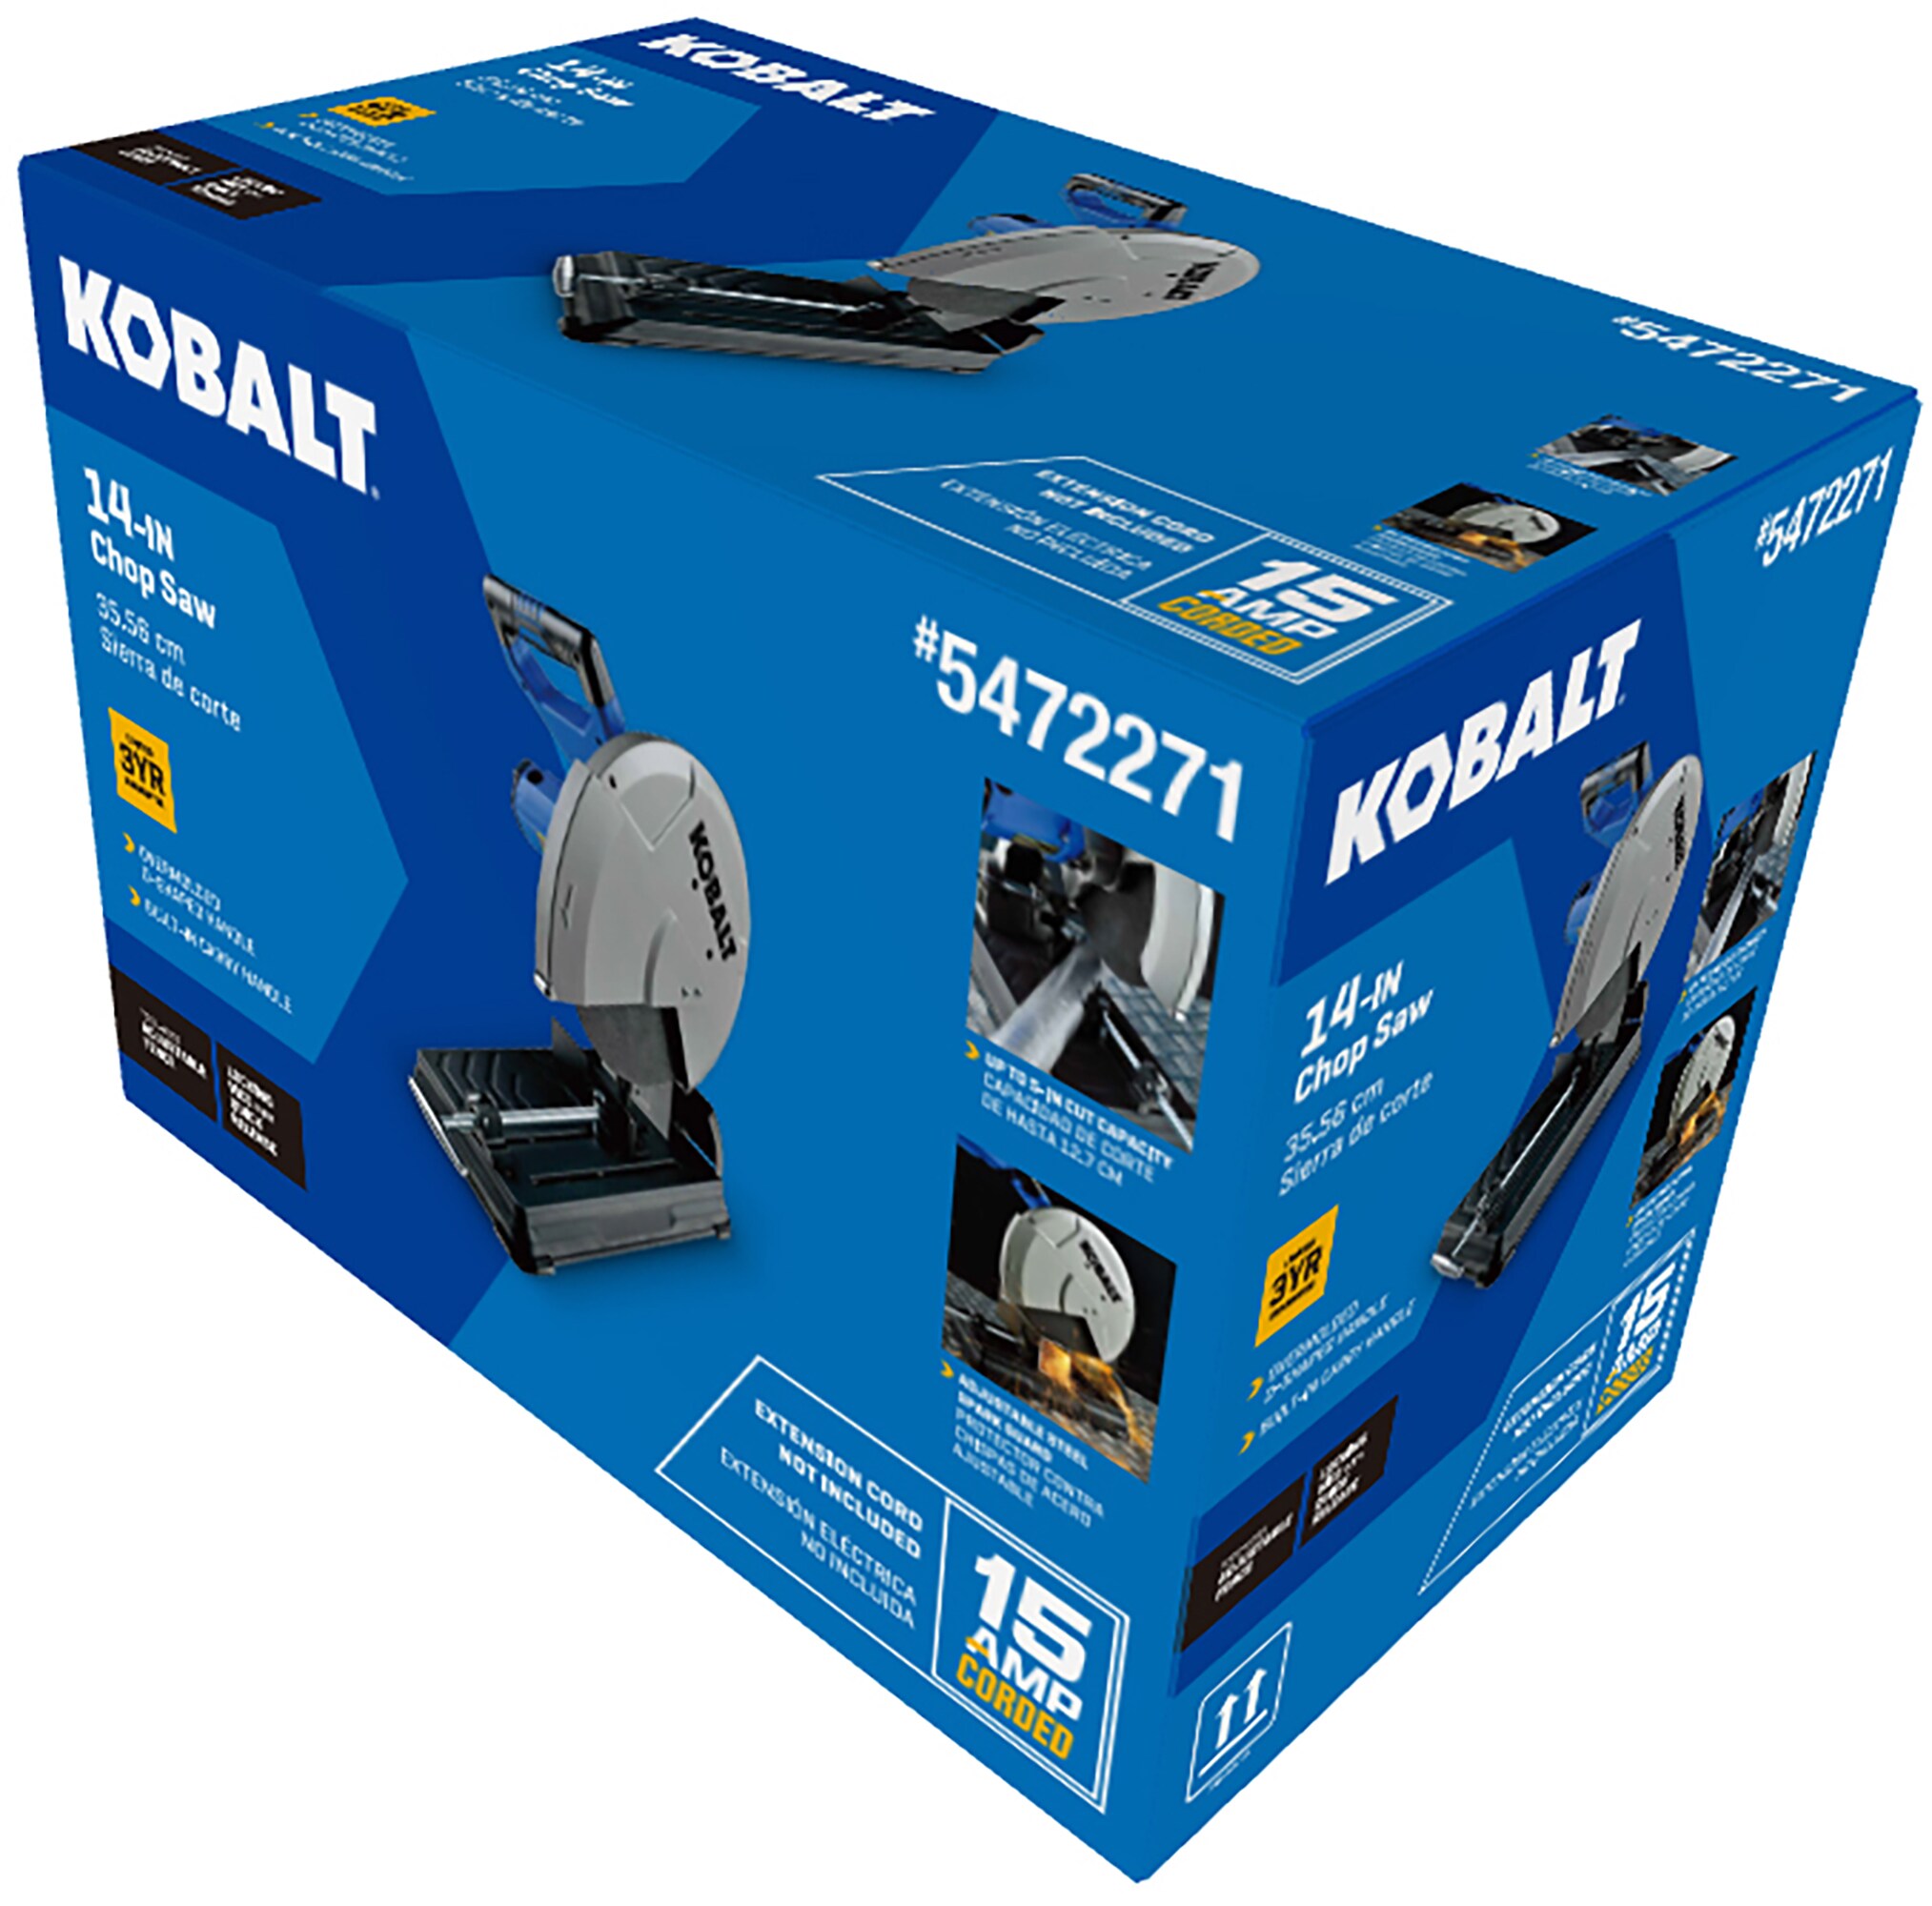 Kobalt 15 Amps 14-in Steel Base Chop Saw in the Chop Saws